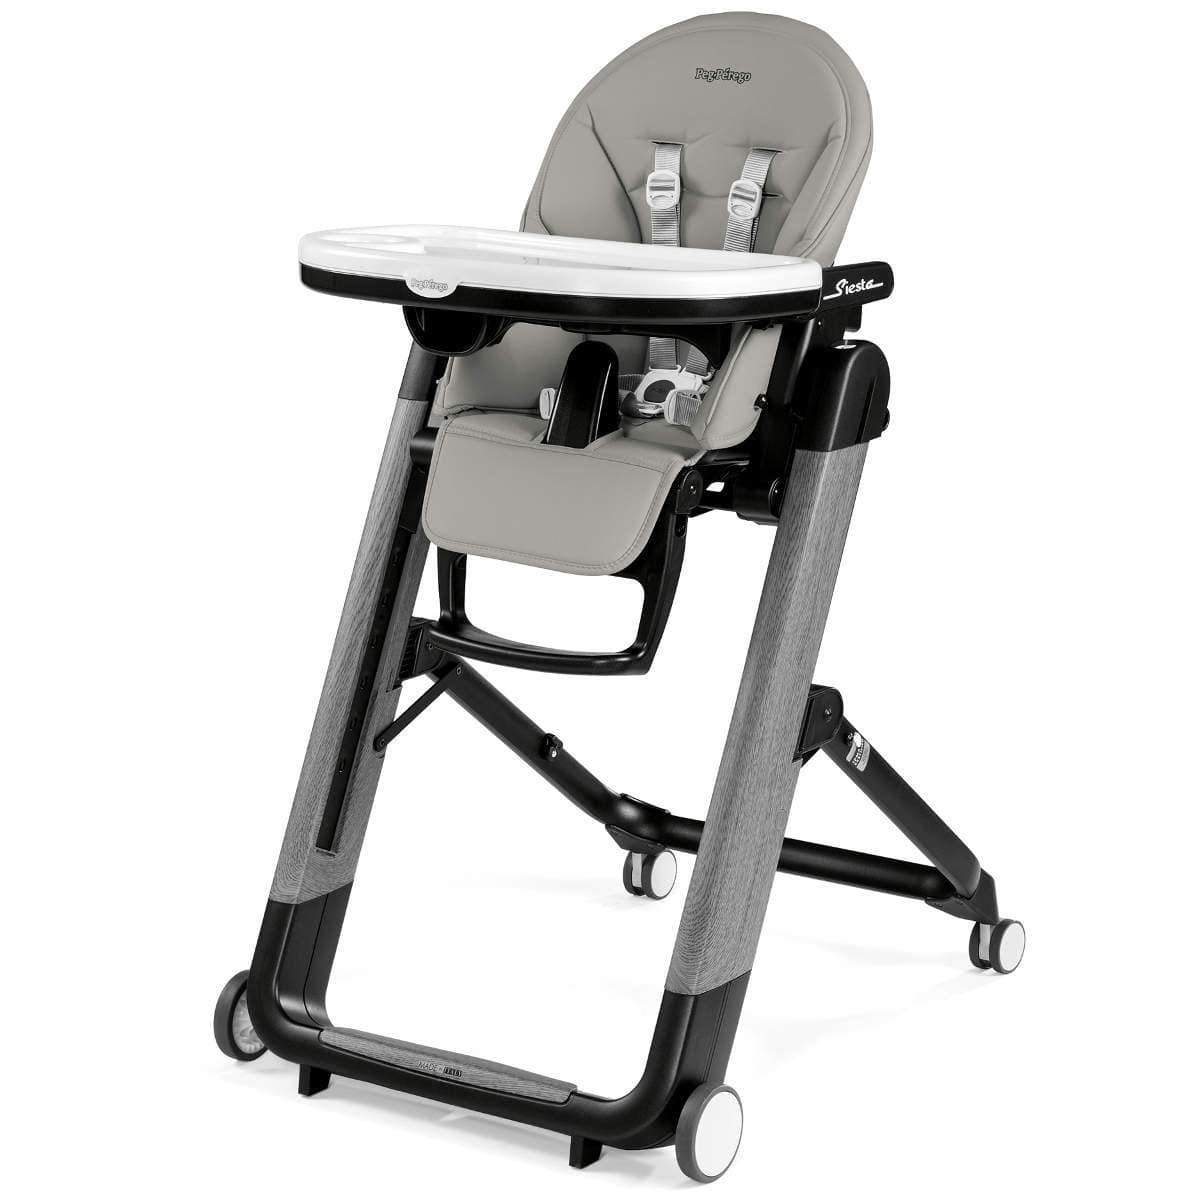 Peg Perego High Chairs & Boosters Ambiance Grey Peg Perego Siesta Ambiance High Chair